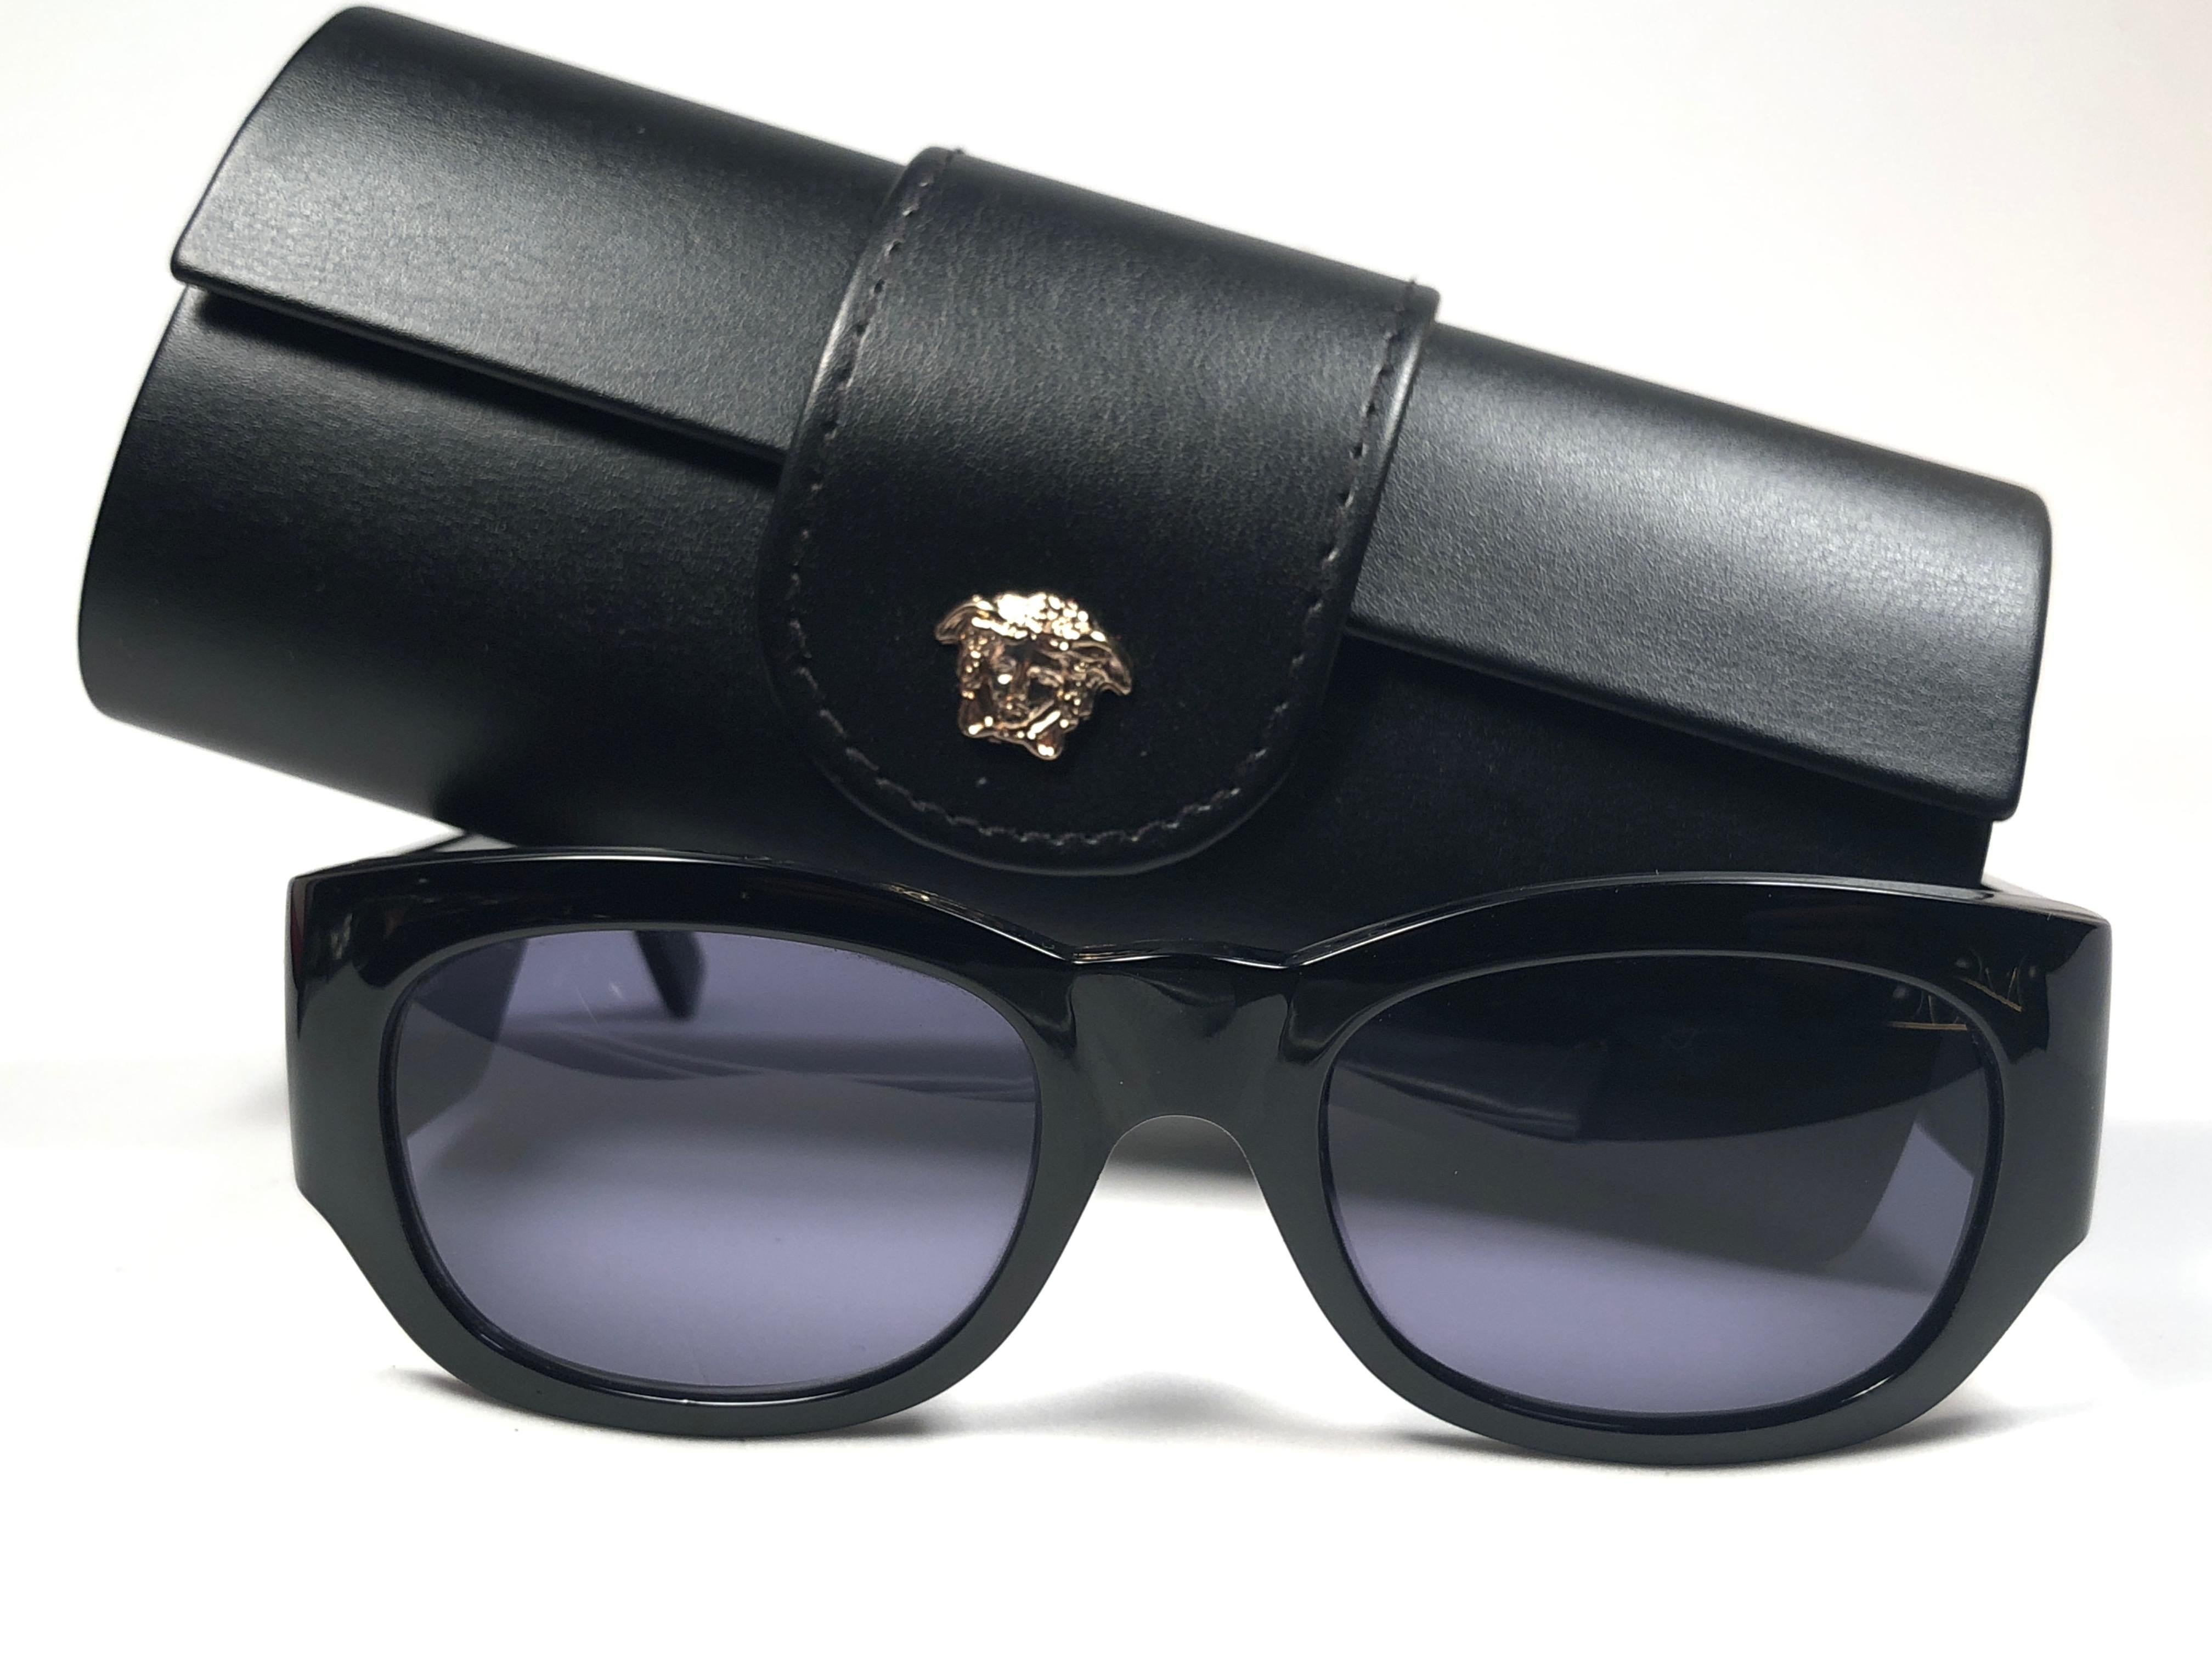 New Vintage Gianni Versace medium BLACK with gold accents frame with medium grey lenses.

New never worn or displayed. Comes with its original Gianni Versace case.
This pair could show minor sign of wear due to storage.

Made in italy.